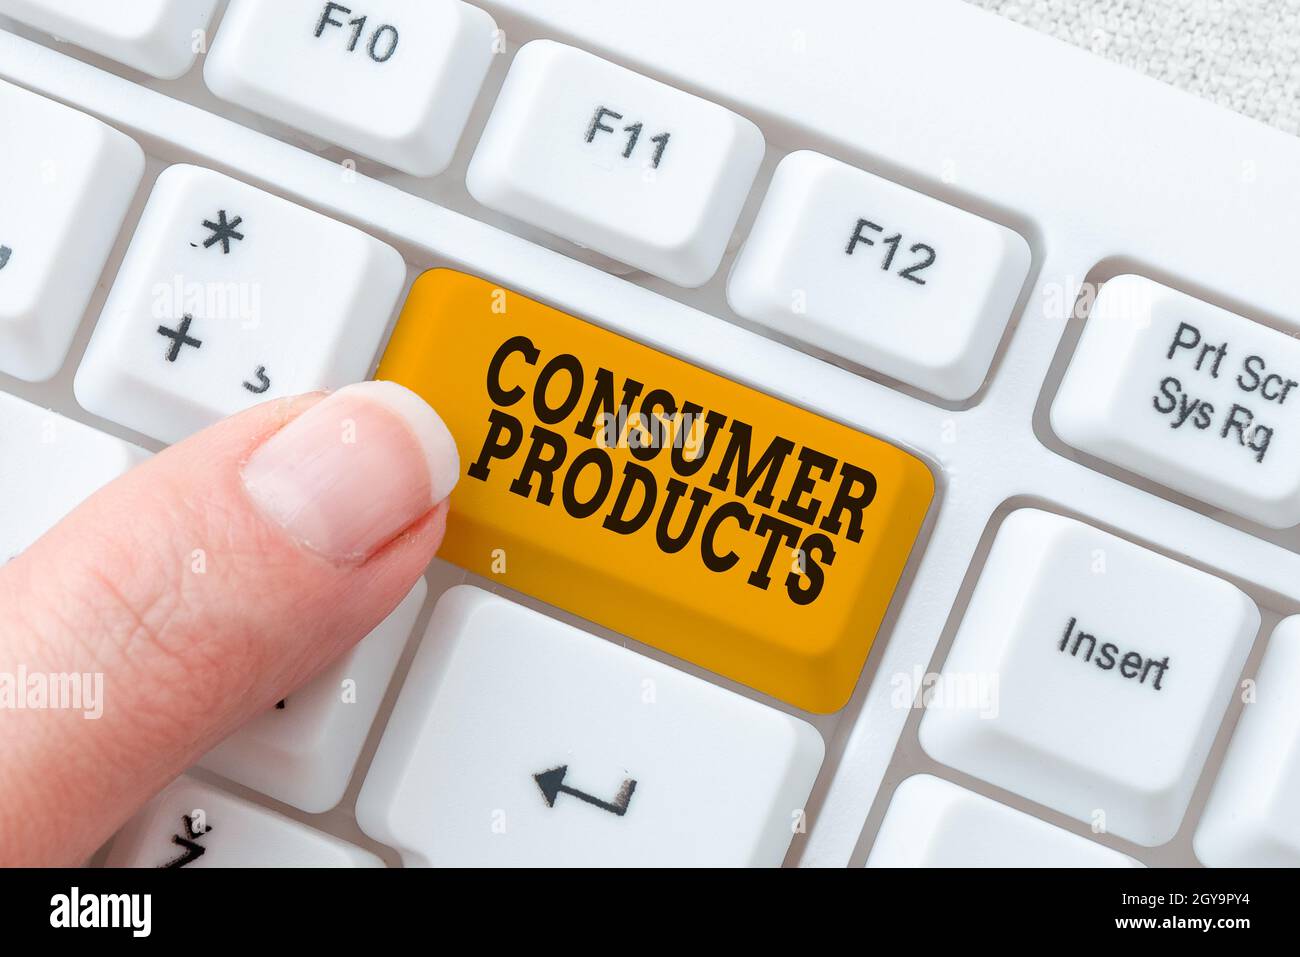 Sign displaying Consumer Products, Concept meaning goods bought for consumption by the average consumer Abstract Fixing Internet Problem, Maintaining Stock Photo